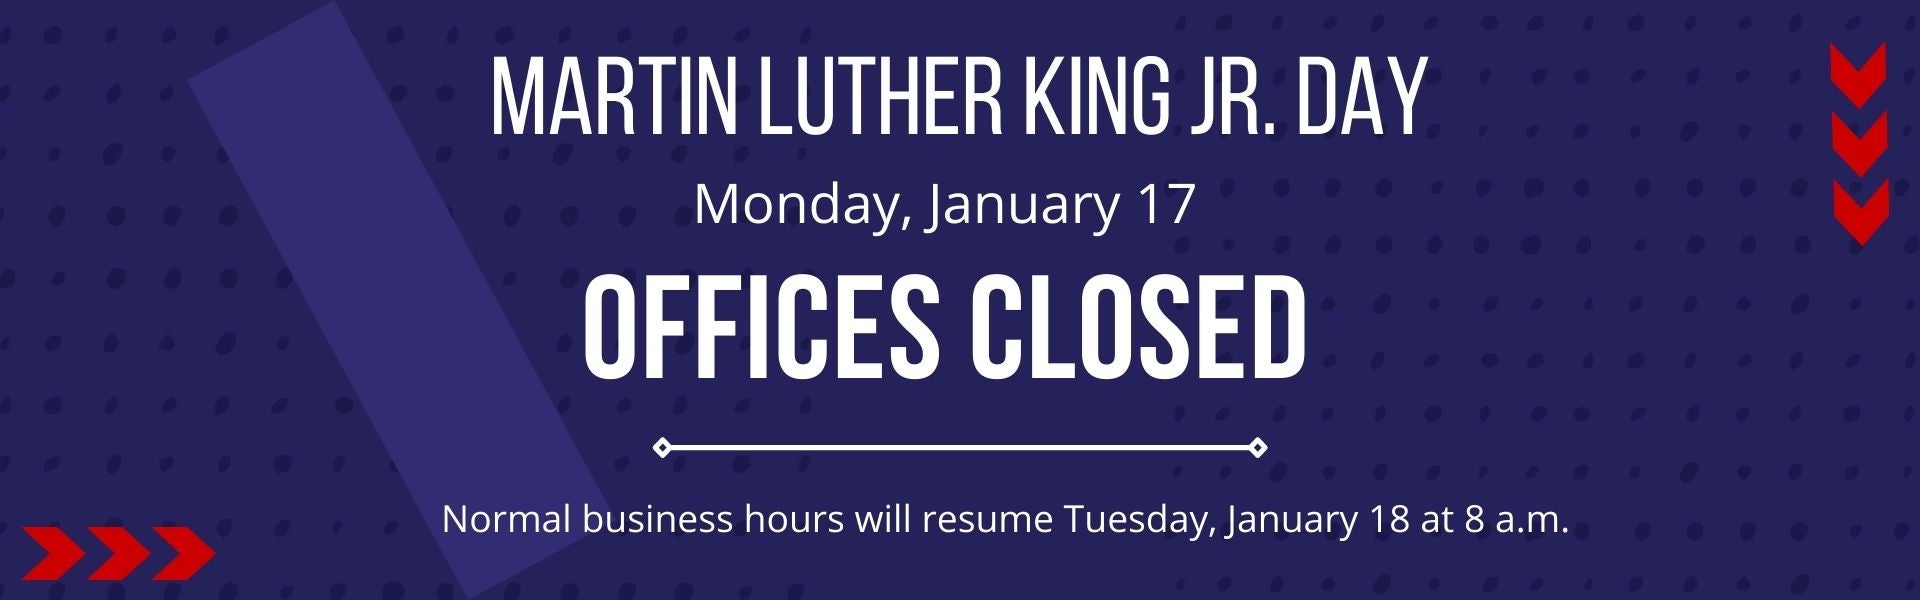 Closed January 17 for Martin Luther King Day